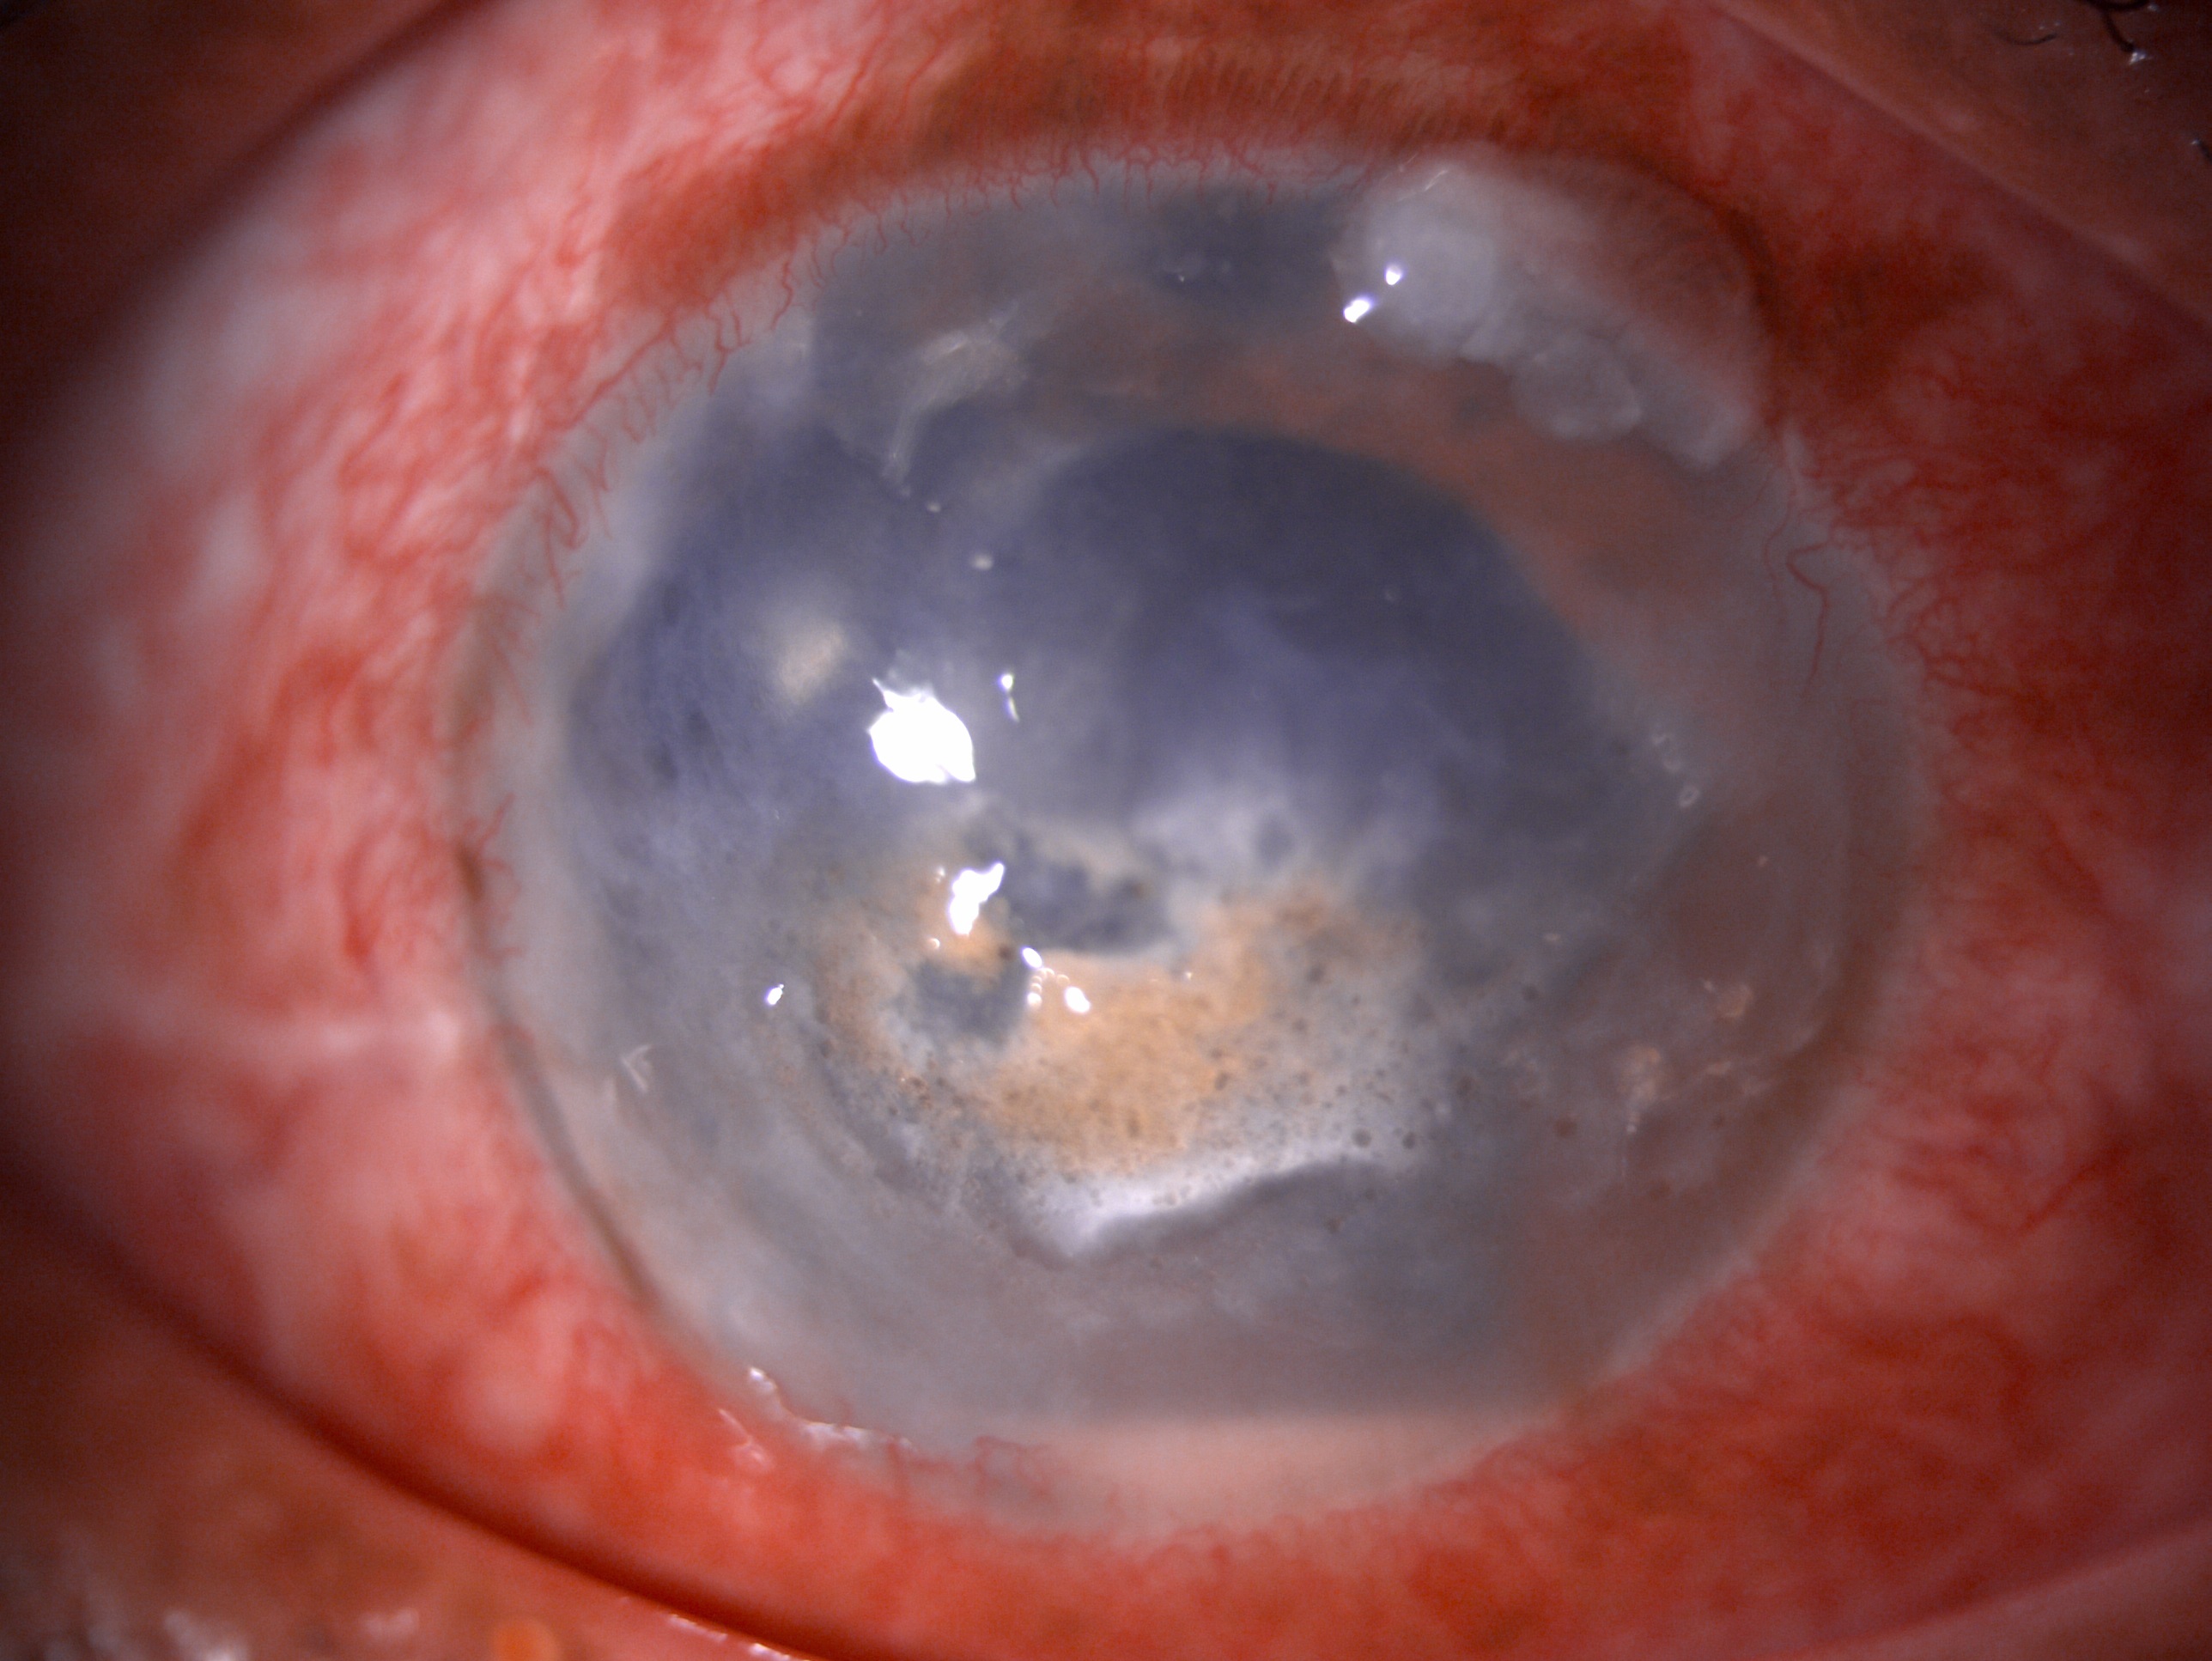 Slit-lamp image of the patient of recurrent anterior uveitis depicting circumciliary congestion, corneal scarring, central ba